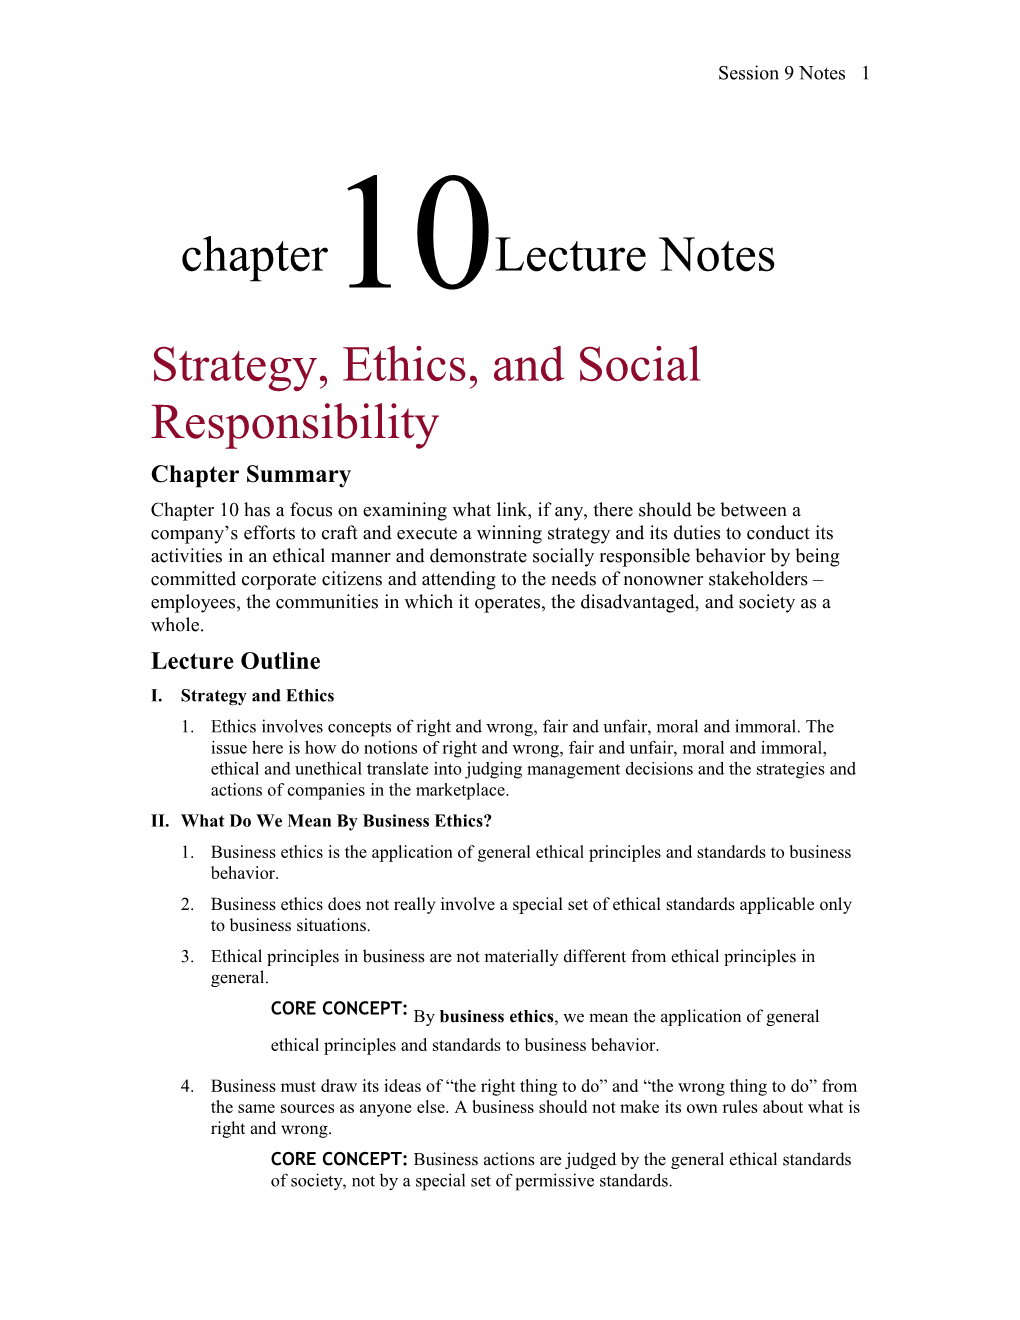 Strategy, Ethics, and Social Responsibility